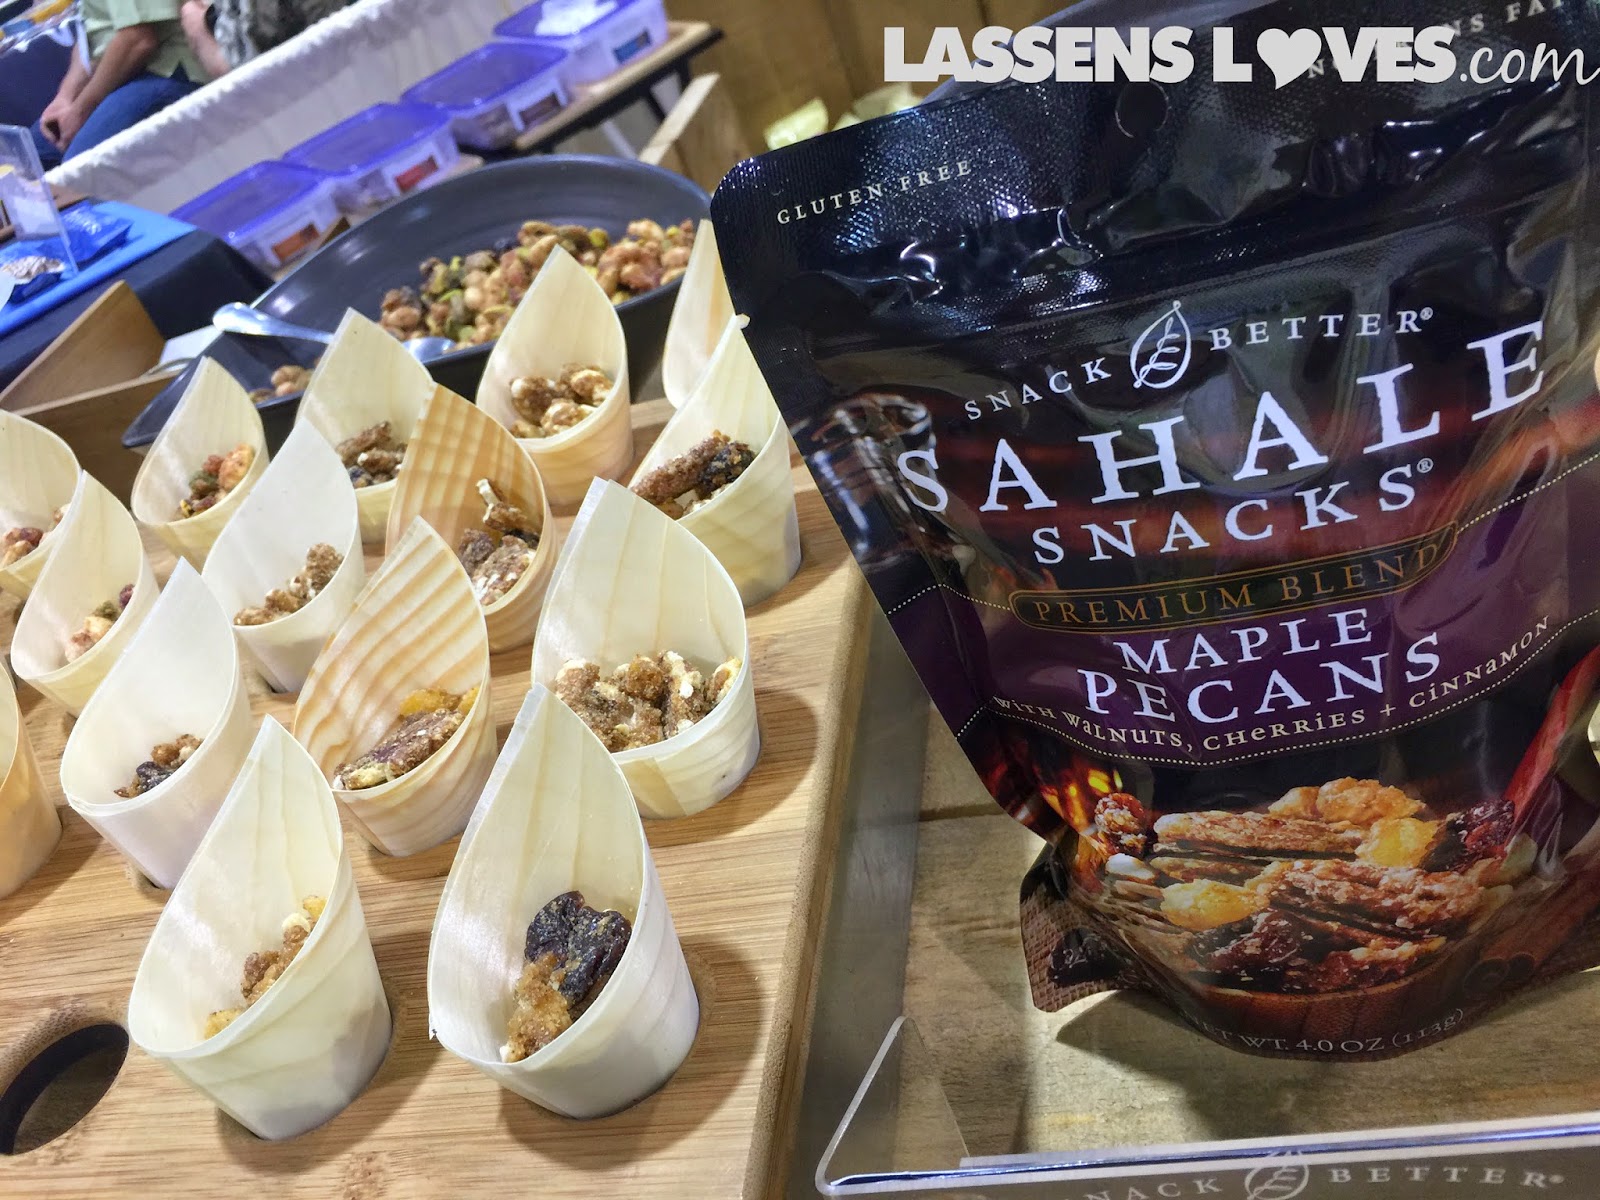 Expo+West+2015, Natural+Foods+Show, New+Natural+Products, sahale+snacks